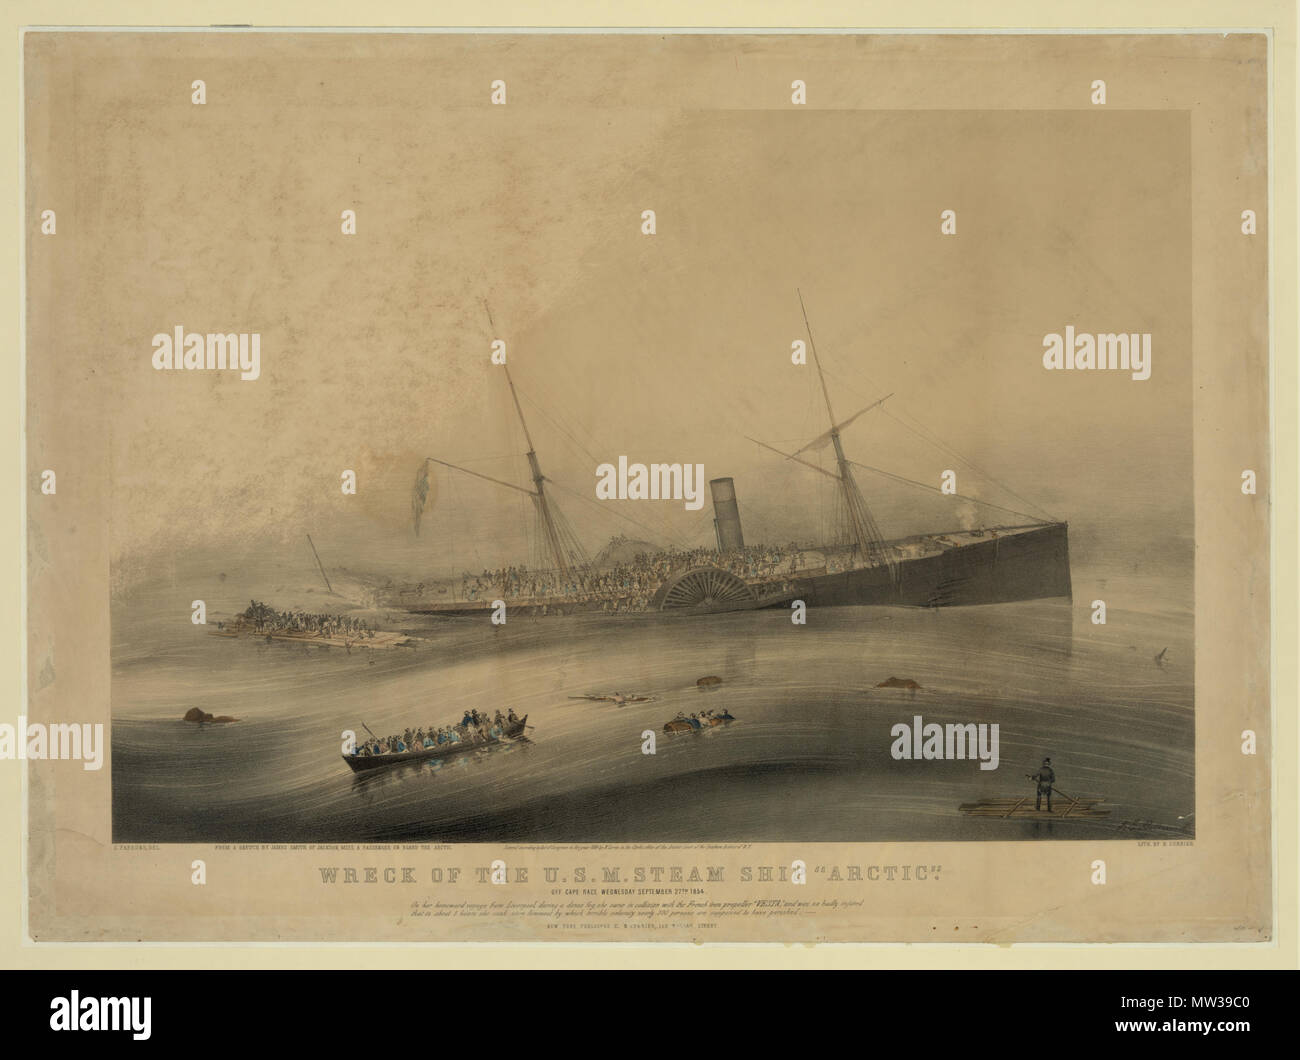 . English: Original caption: 'Wreck of the U.S.M. Steam Ship 'Arctic'. Off Cape Race Wednesday September 27th 1854. On her homeward voyage from Liverpool, during a dense fog, she came in collision with the French iron propeller 'VESTA,' and was so badly injured that in about 5 hours she sunk stern foremost by which terrible calamity nearly 300 persons are supposed to have perished.' . 1854. James E. Butterworth (artist) 653 Wreck of the U.S.M. steam ship &quot;Arctic&quot; (half-size) Stock Photo